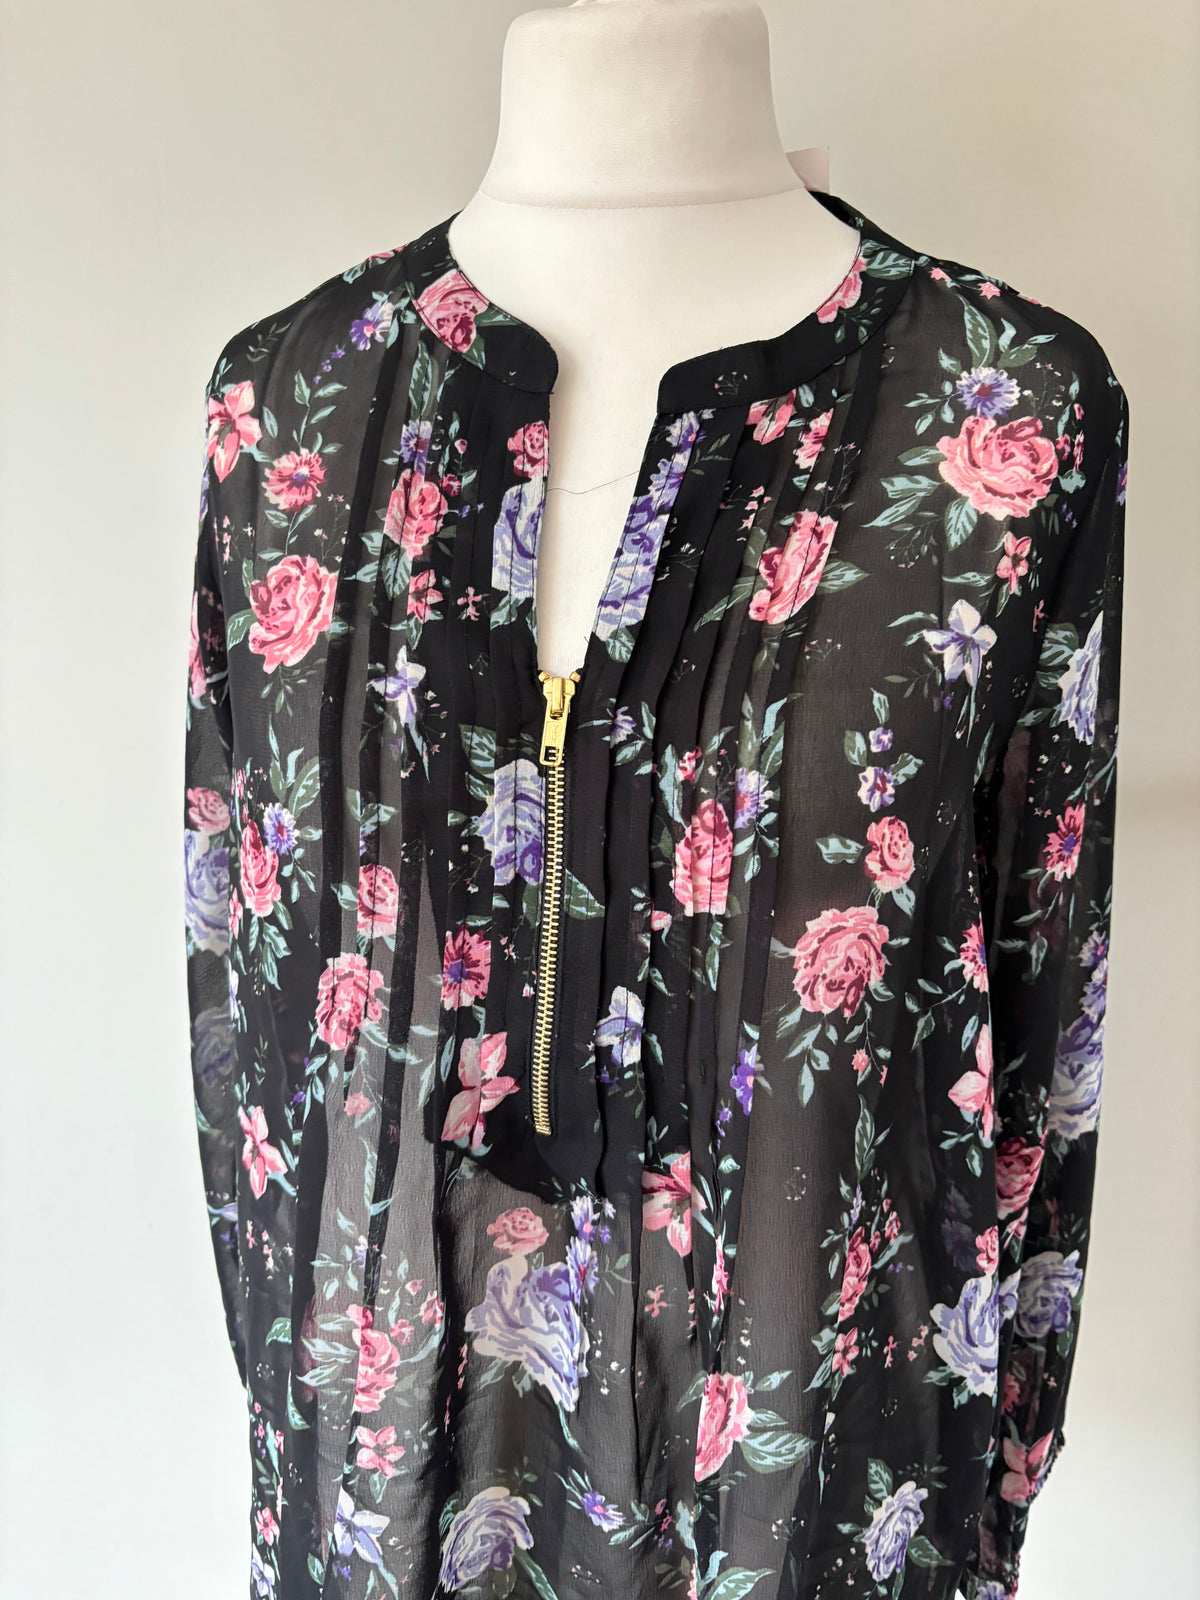 Dark Floral Chiffon Zip Pintuck Blouse by Together Size 12